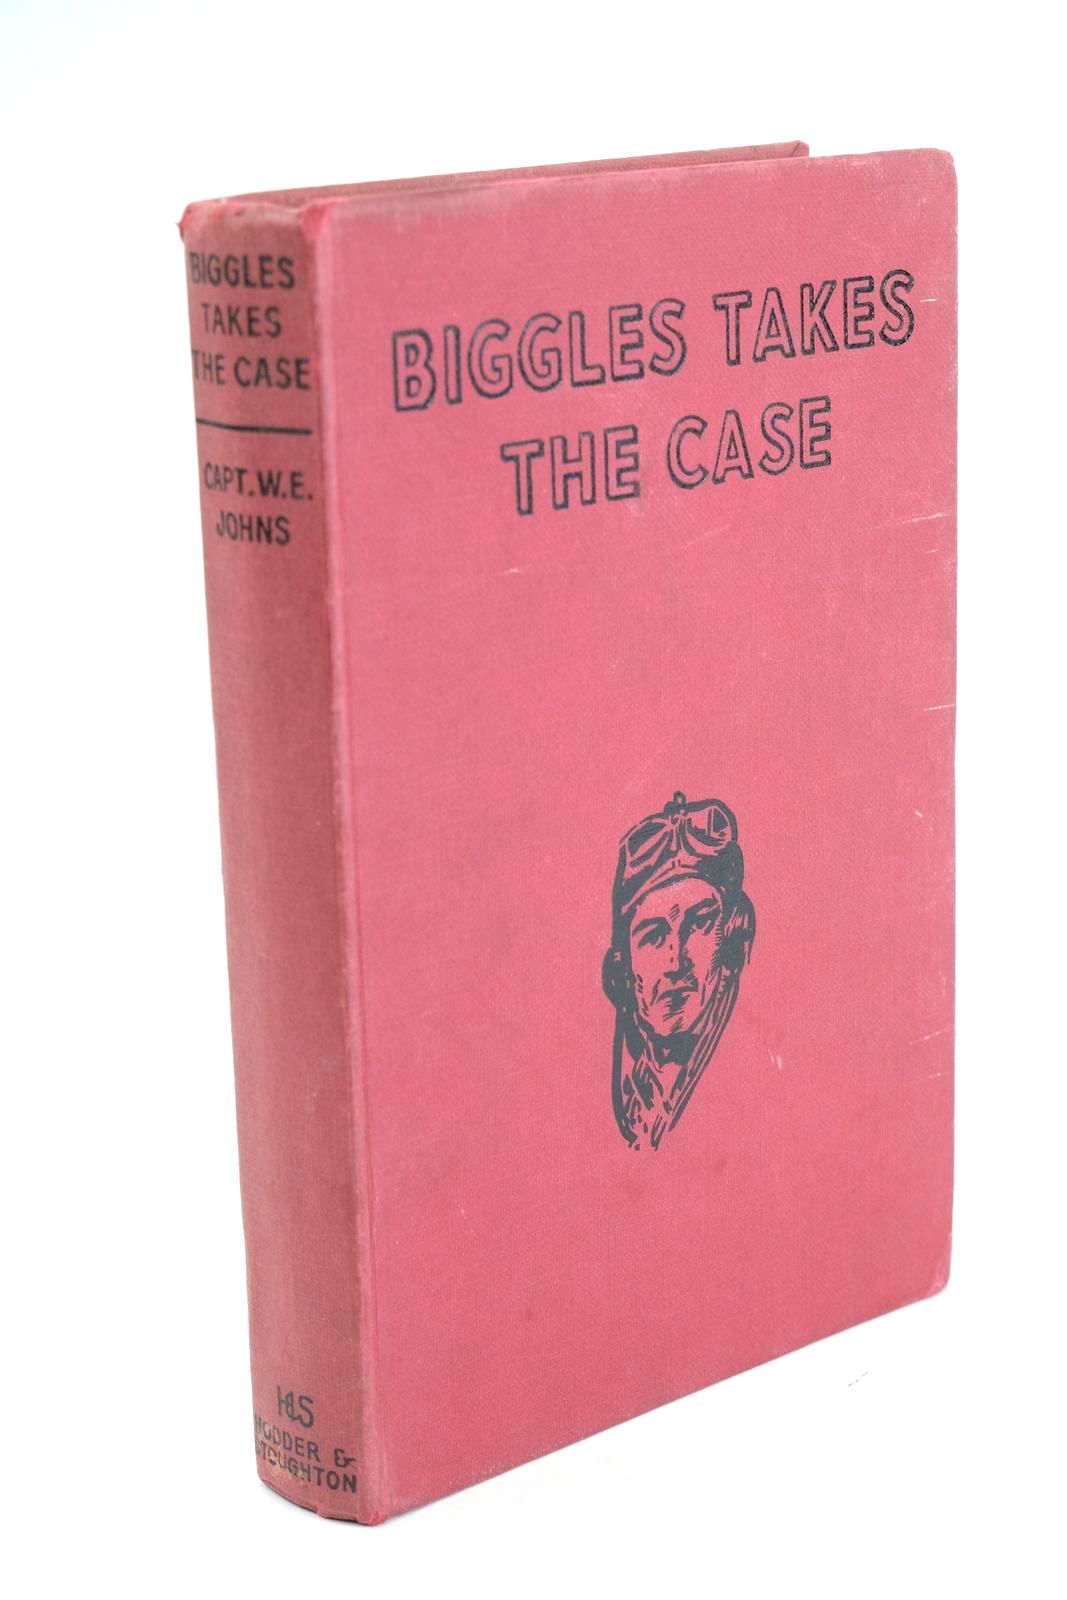 Photo of BIGGLES TAKES THE CASE written by Johns, W.E. illustrated by Stead, Leslie published by Hodder &amp; Stoughton (STOCK CODE: 1324861)  for sale by Stella & Rose's Books